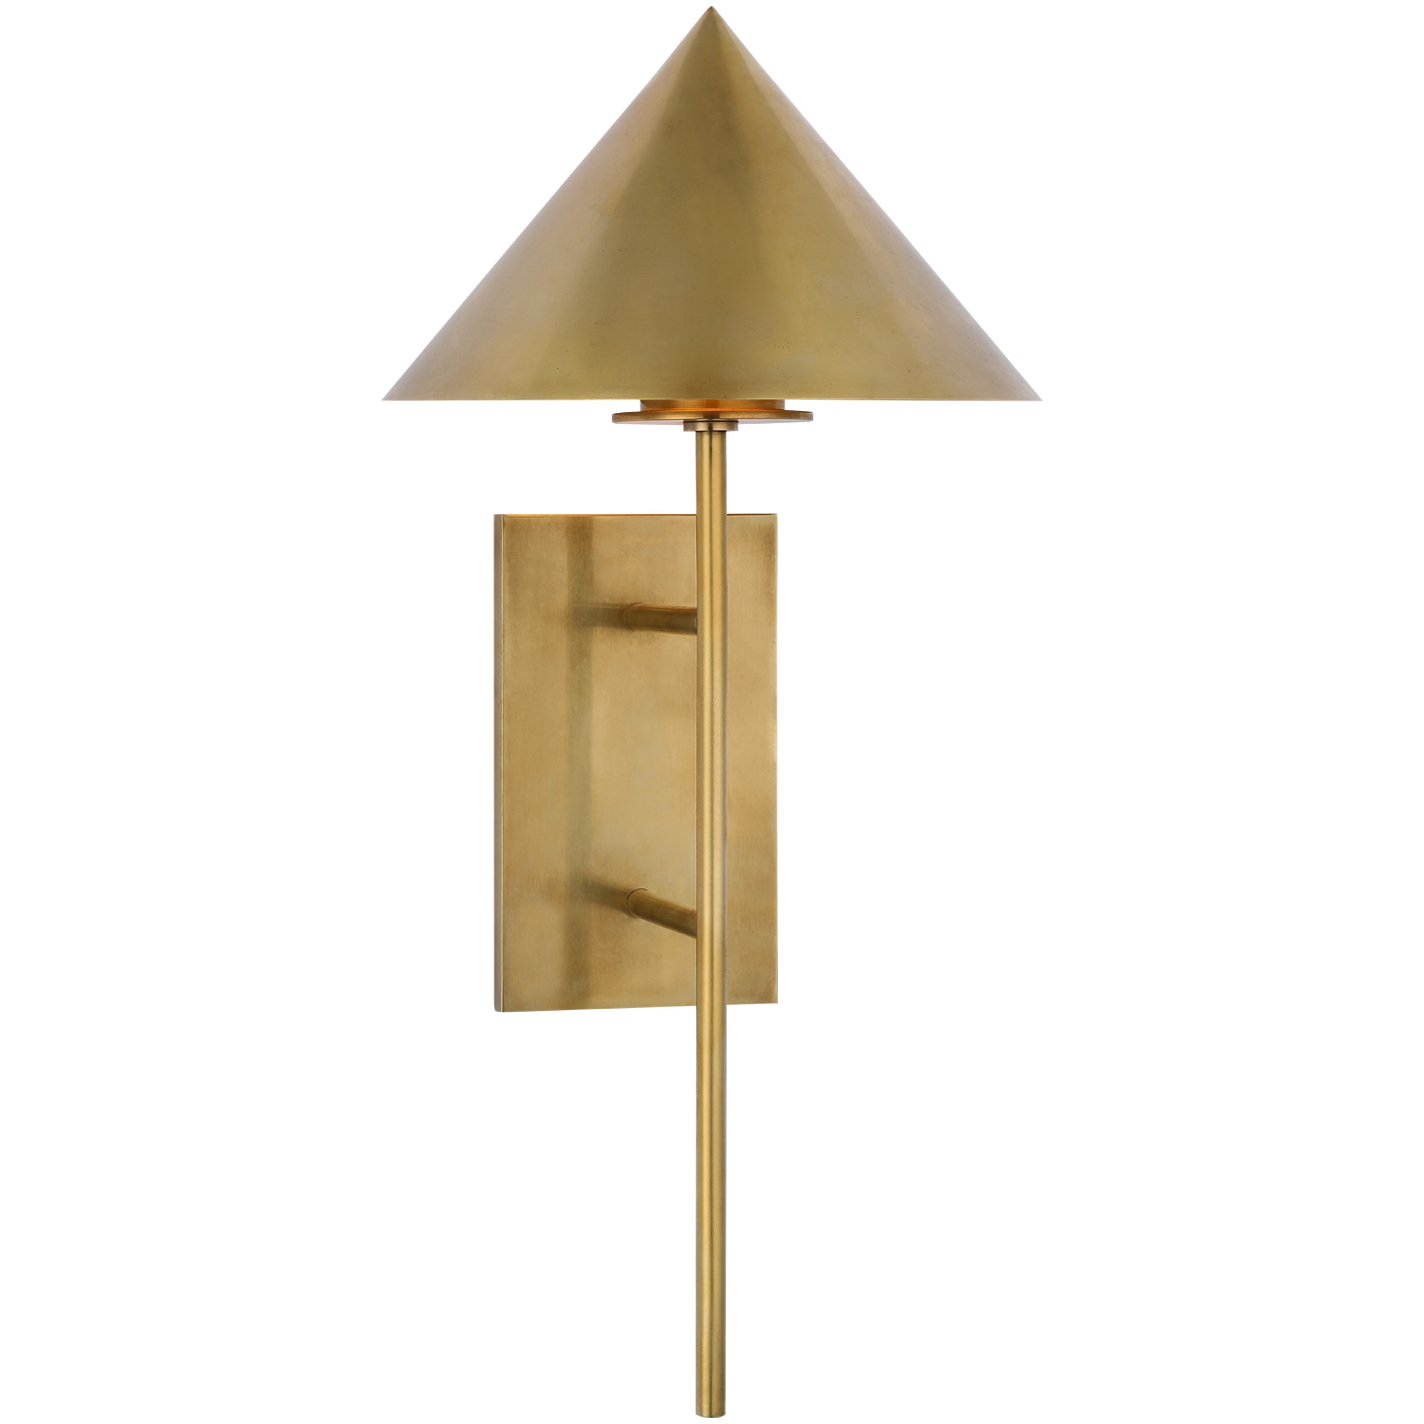 Paloma Contreras Orsay Small Table Lamp in Hand-Rubbed Antique Brass